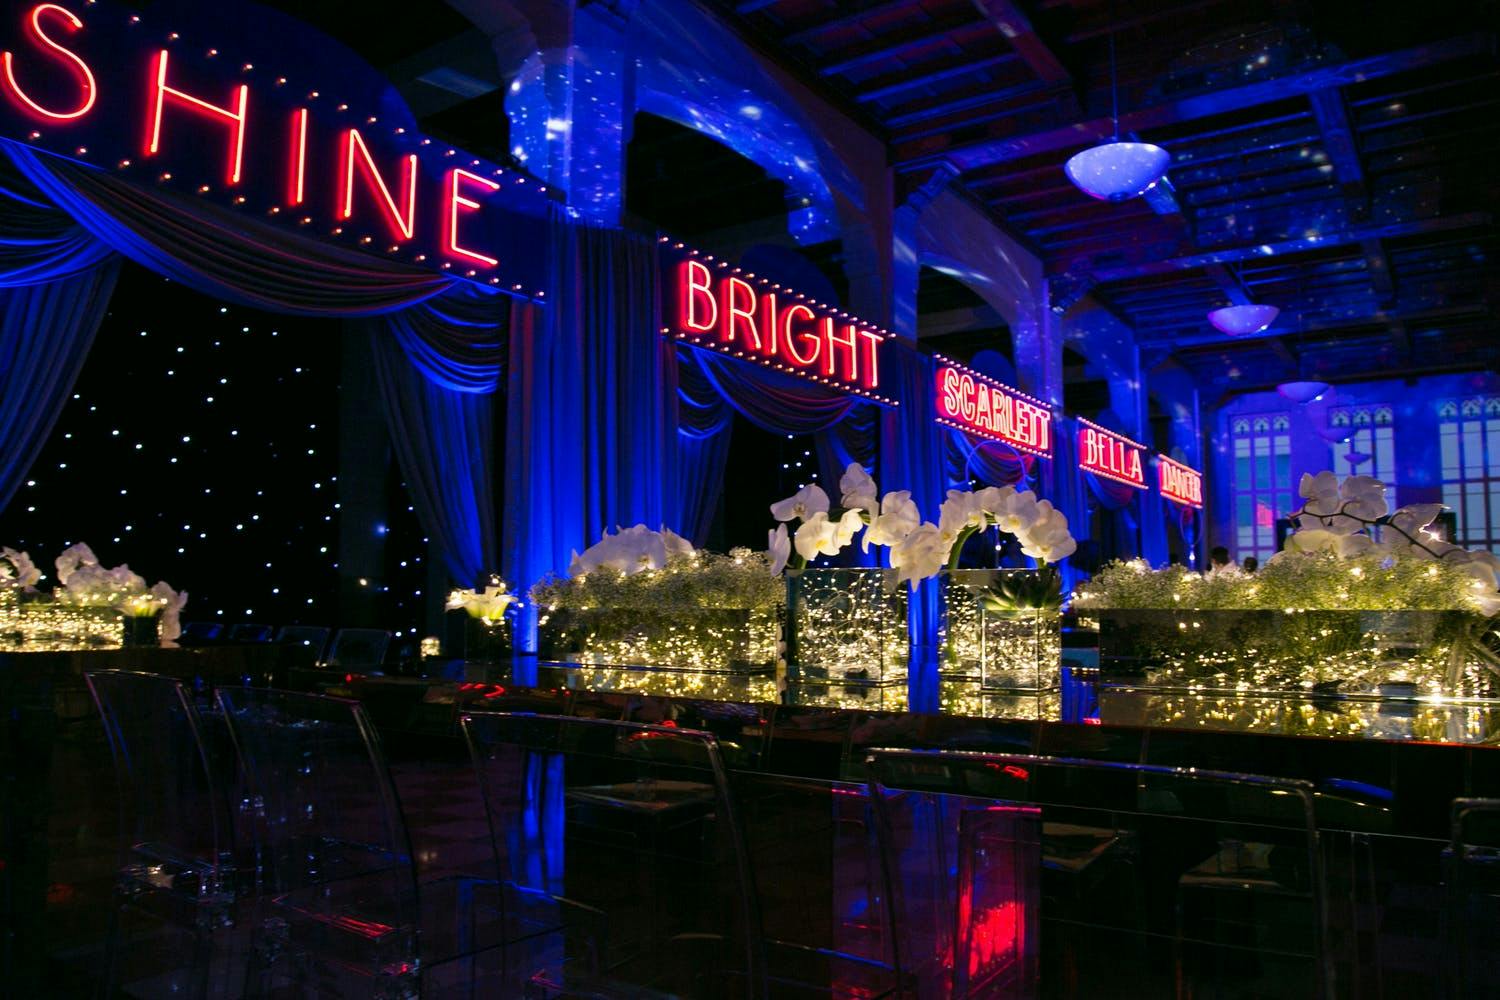 Cirque du Soleil themed Bat Mitzvah party with red neon signage and blue uplighting | PartySlate